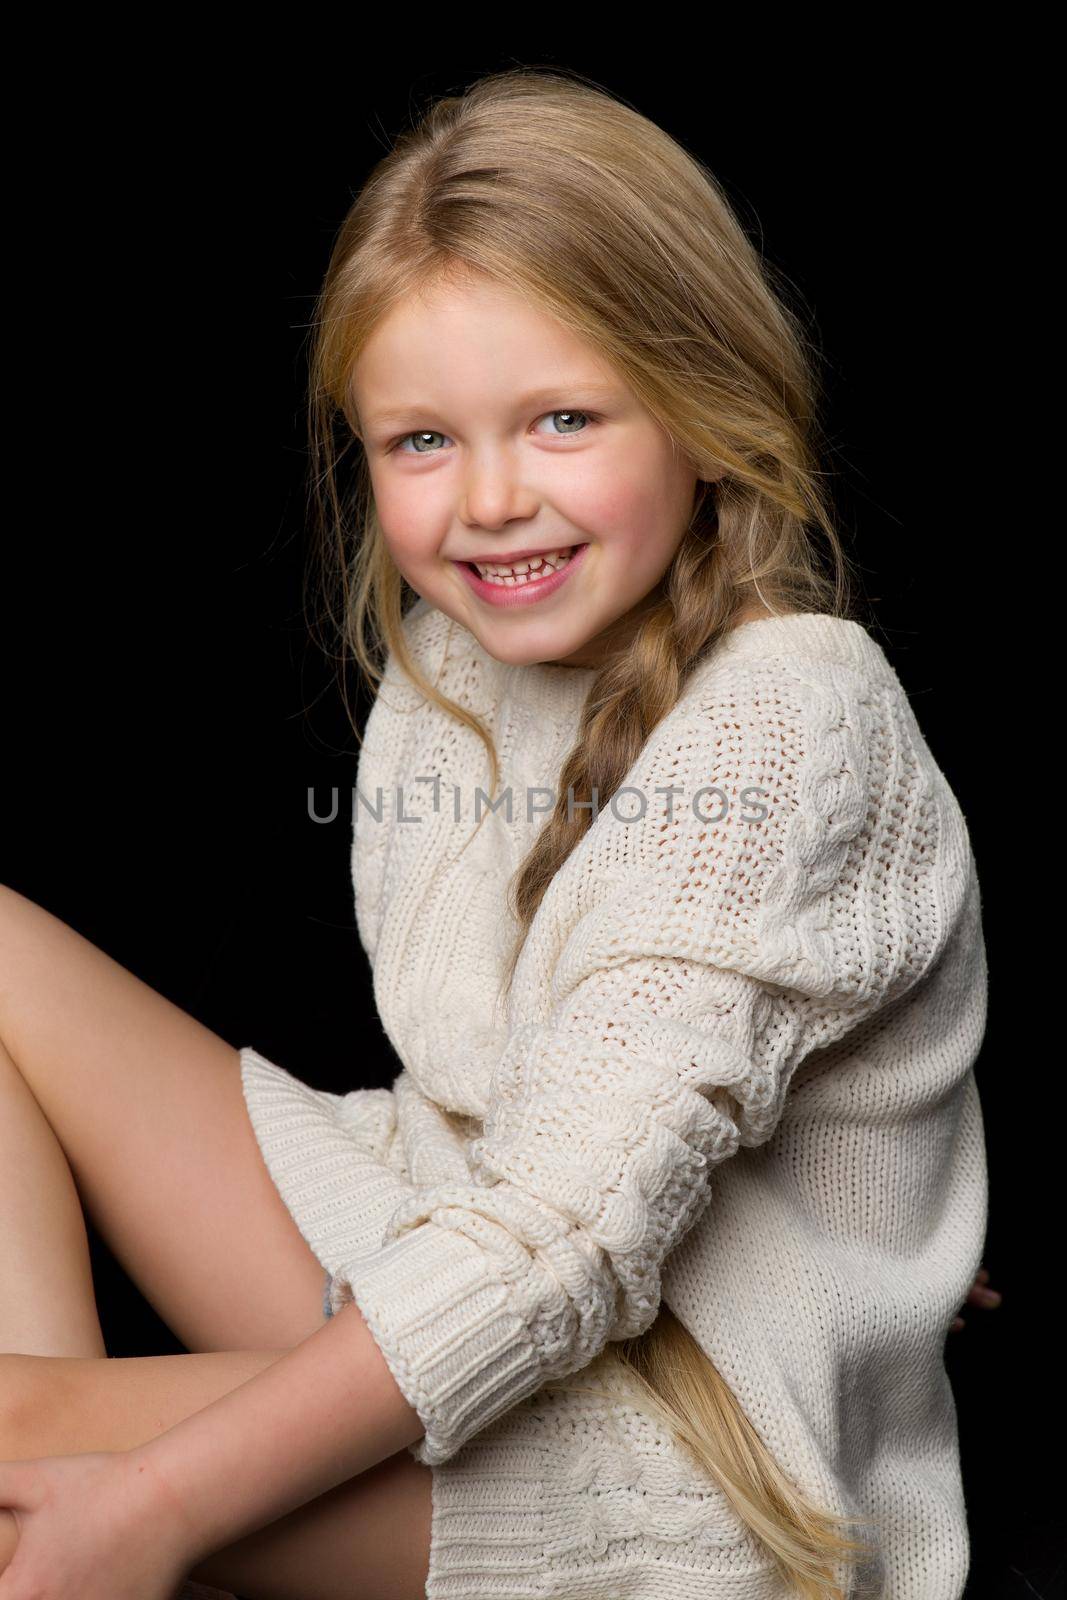 Close up portrait of beautiful girl with braid. Smiling cute little girl wearing warm knitted jumper sitting on floor against black background in studio